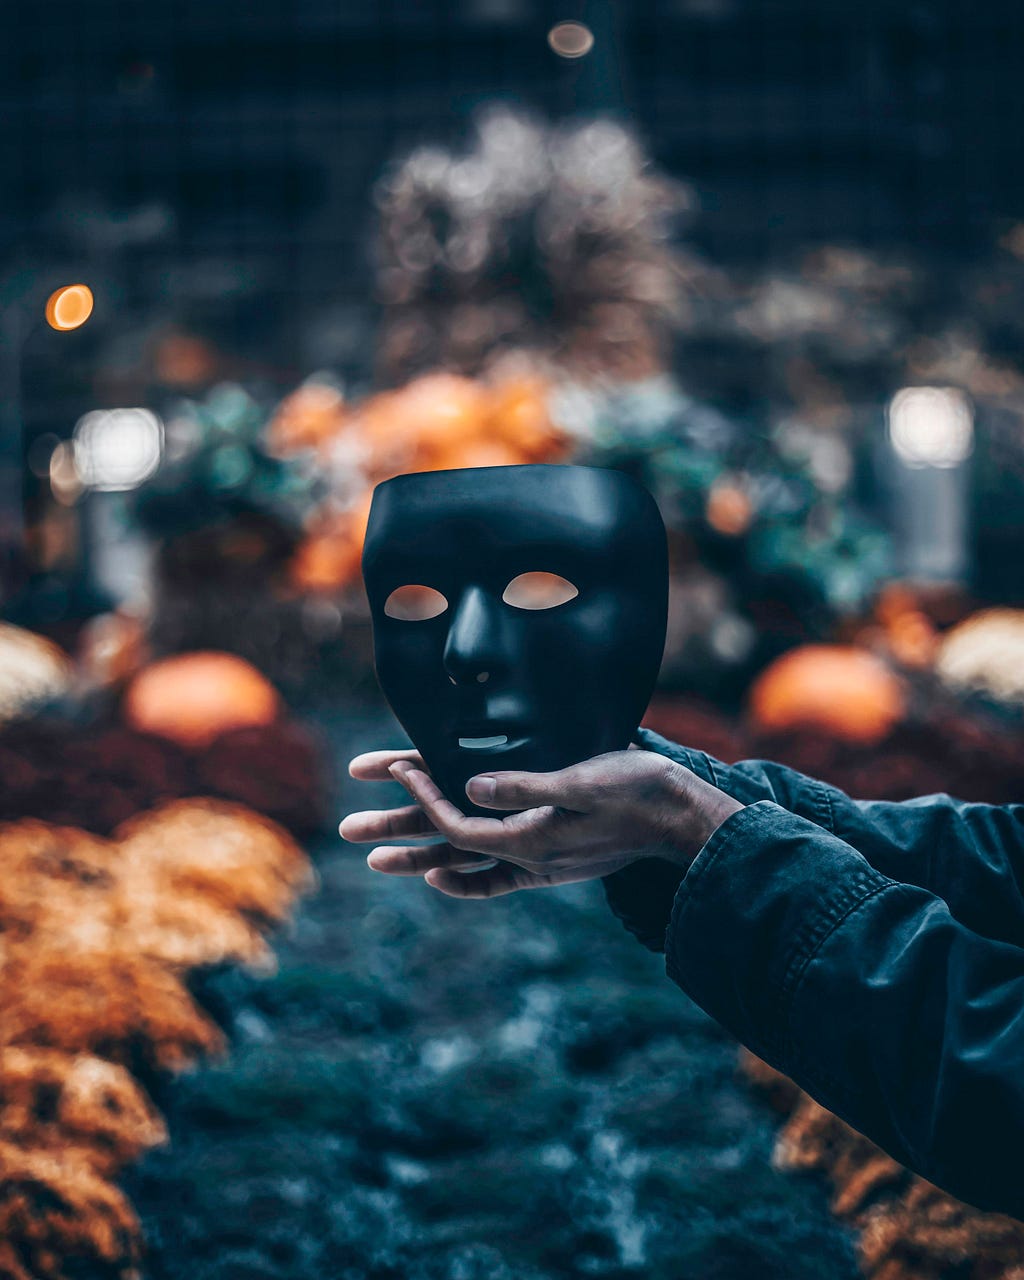 A black theatre mask being held out in someones hands